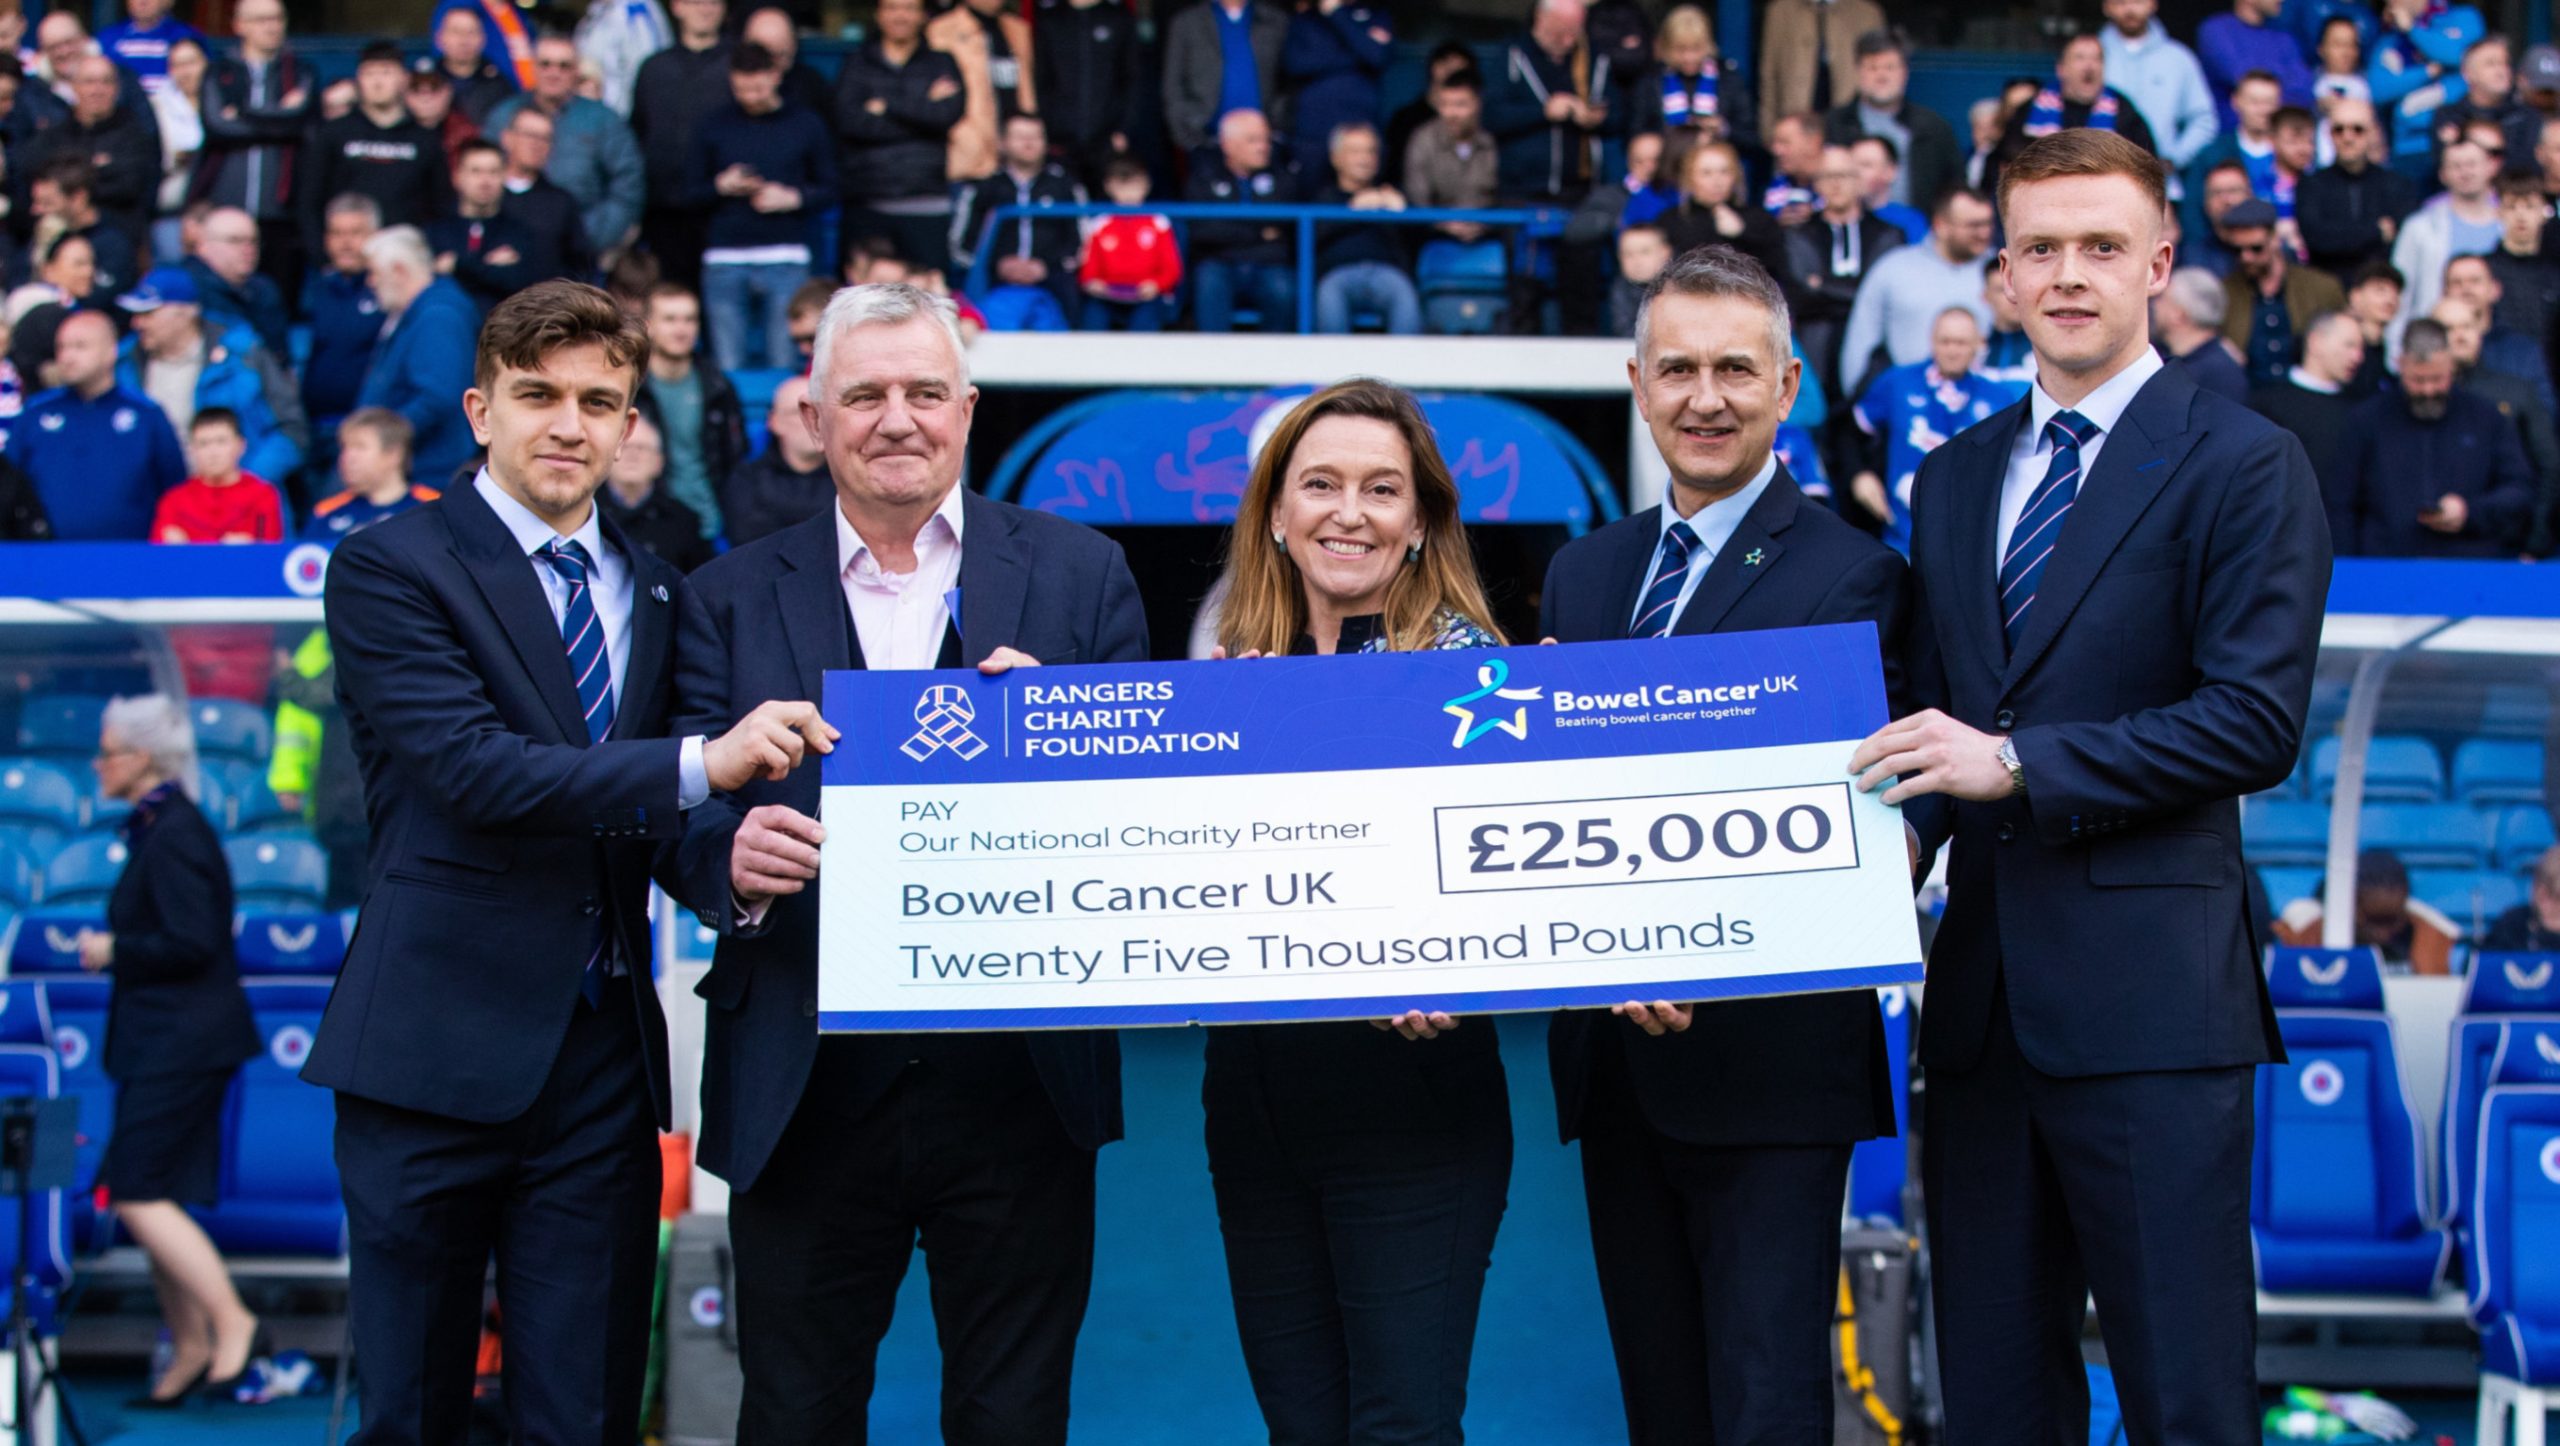 5 people in Ibrox stadium holding Bowel Cancer Cheque